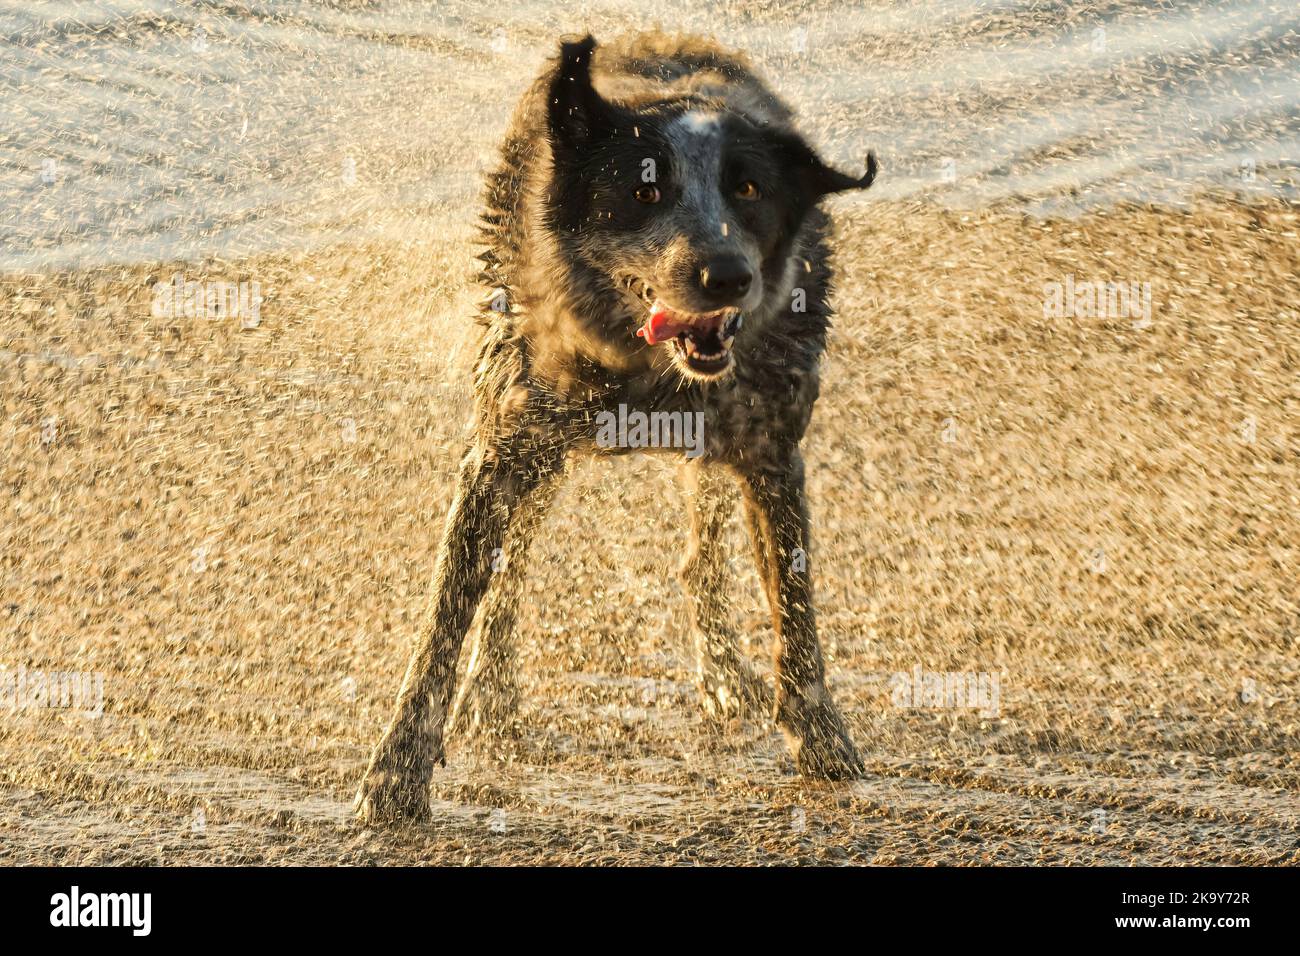 Black and white spotted dog shaking water off, back lit by setting sun, creating a veil of golden water drops Stock Photo